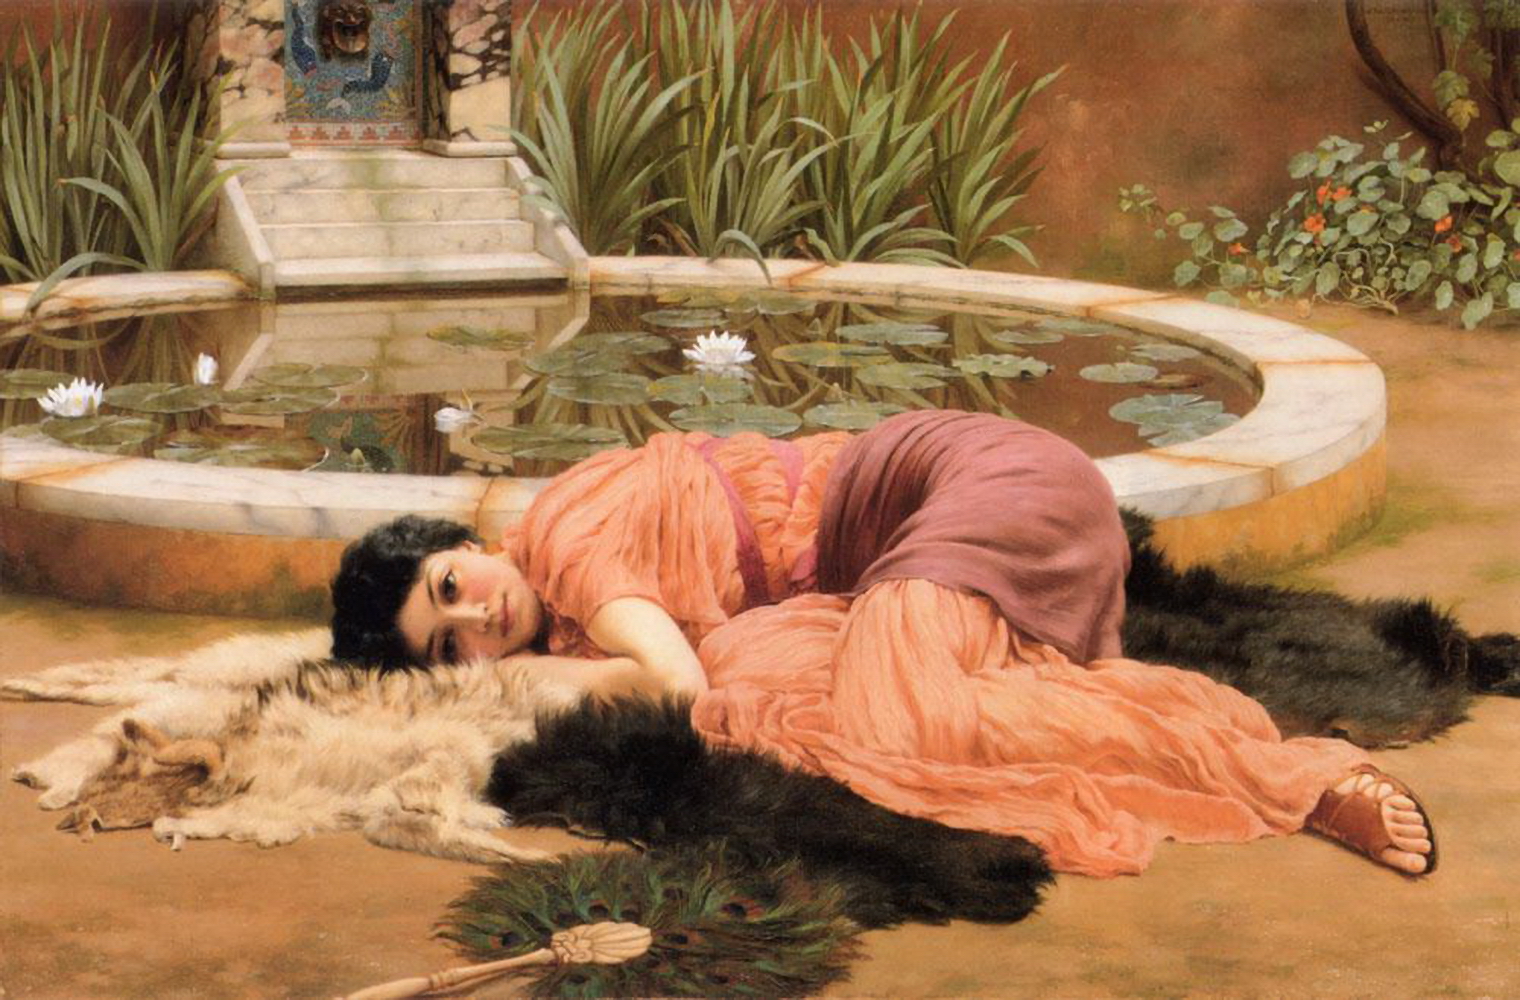 Sweet Nothings by John William Godward - 1904 - - private collection